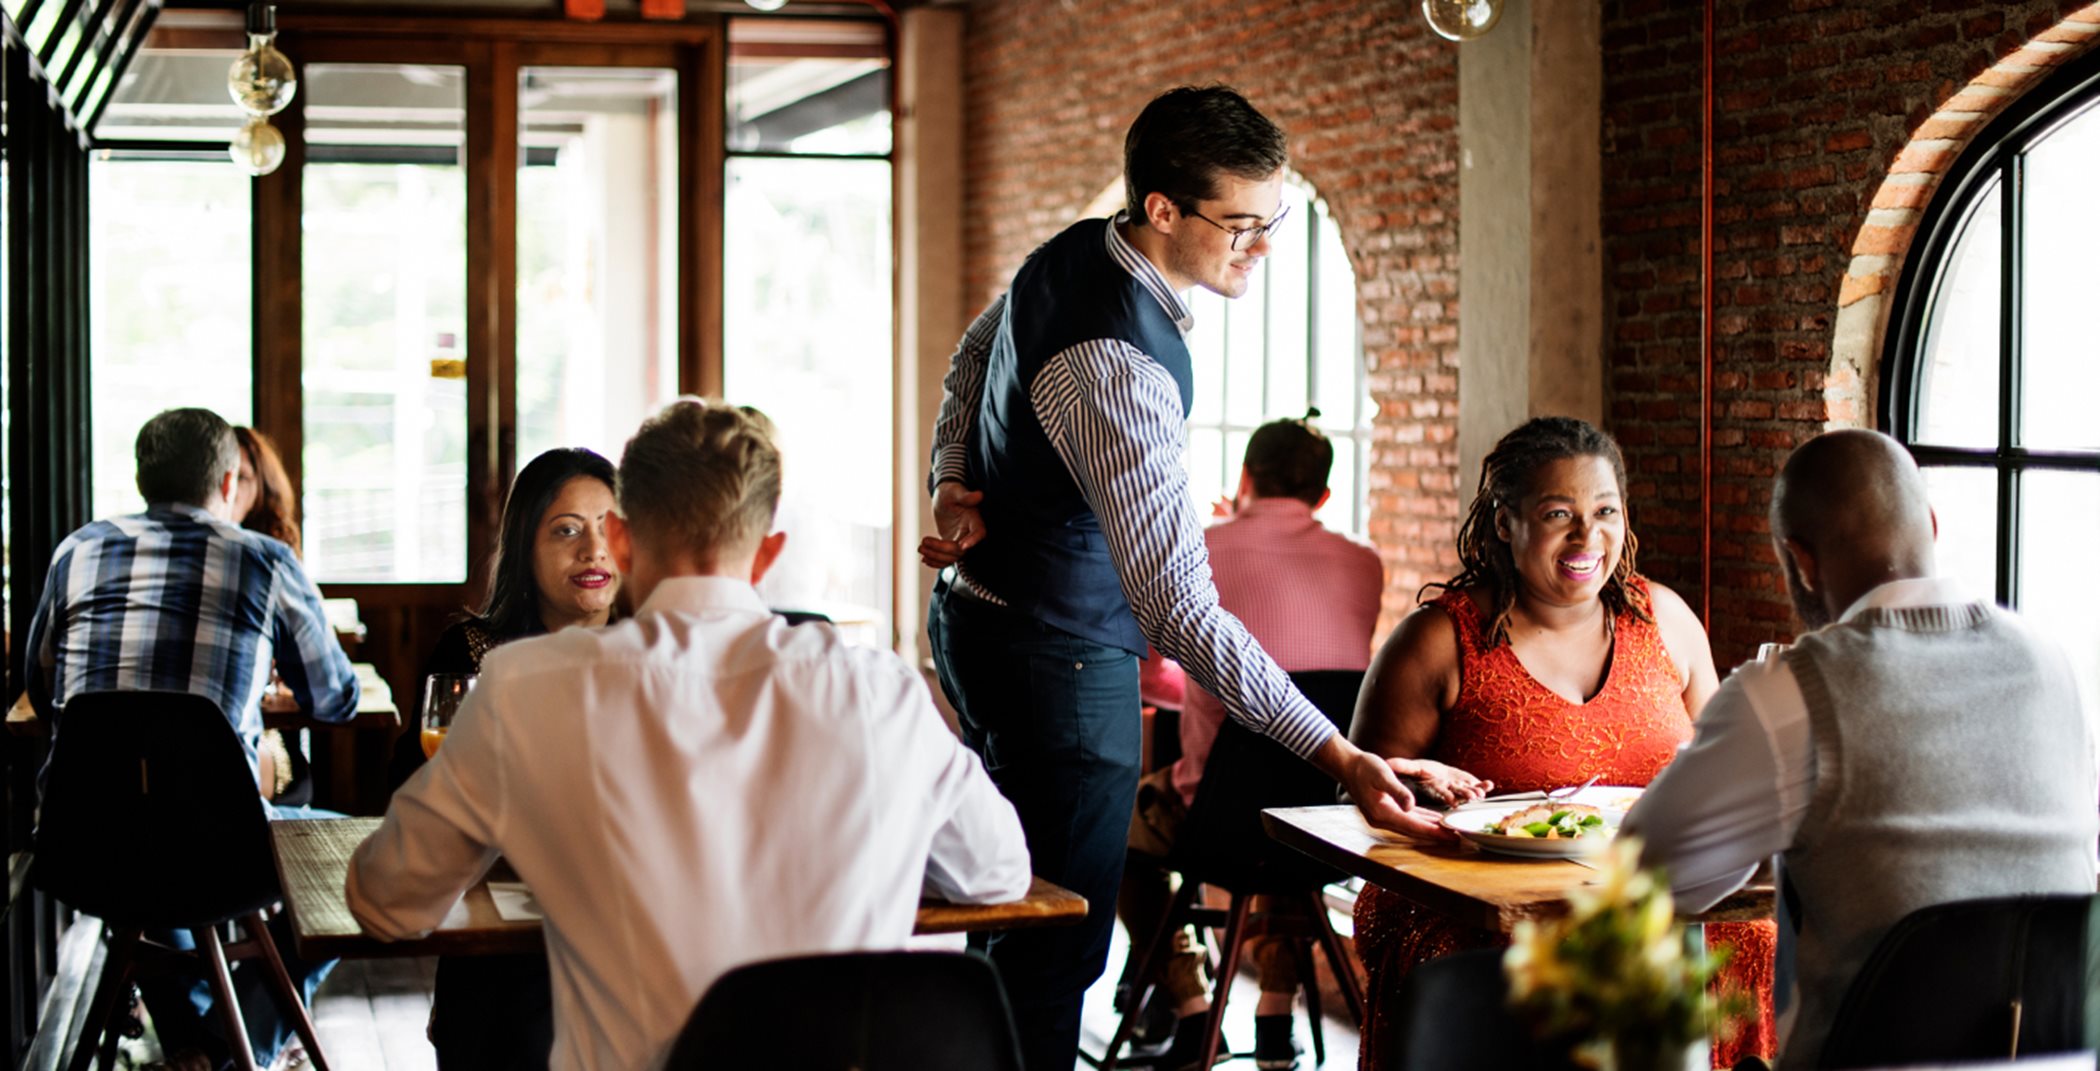 Server serving food to couple at restaurant